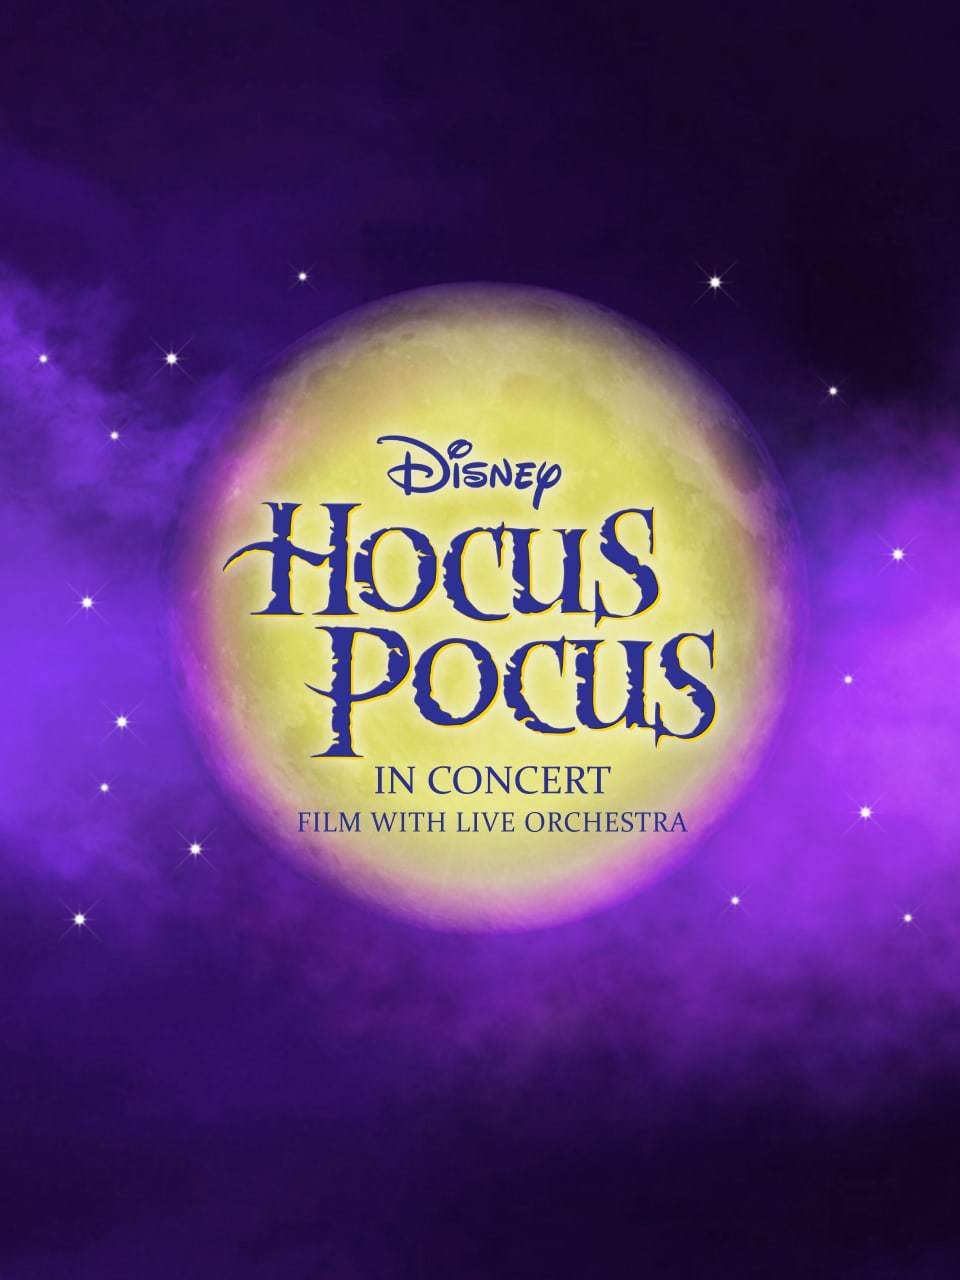 Disney's Hocus Pocus logo on a yellow full moon surrounded by purple clouds and stars.